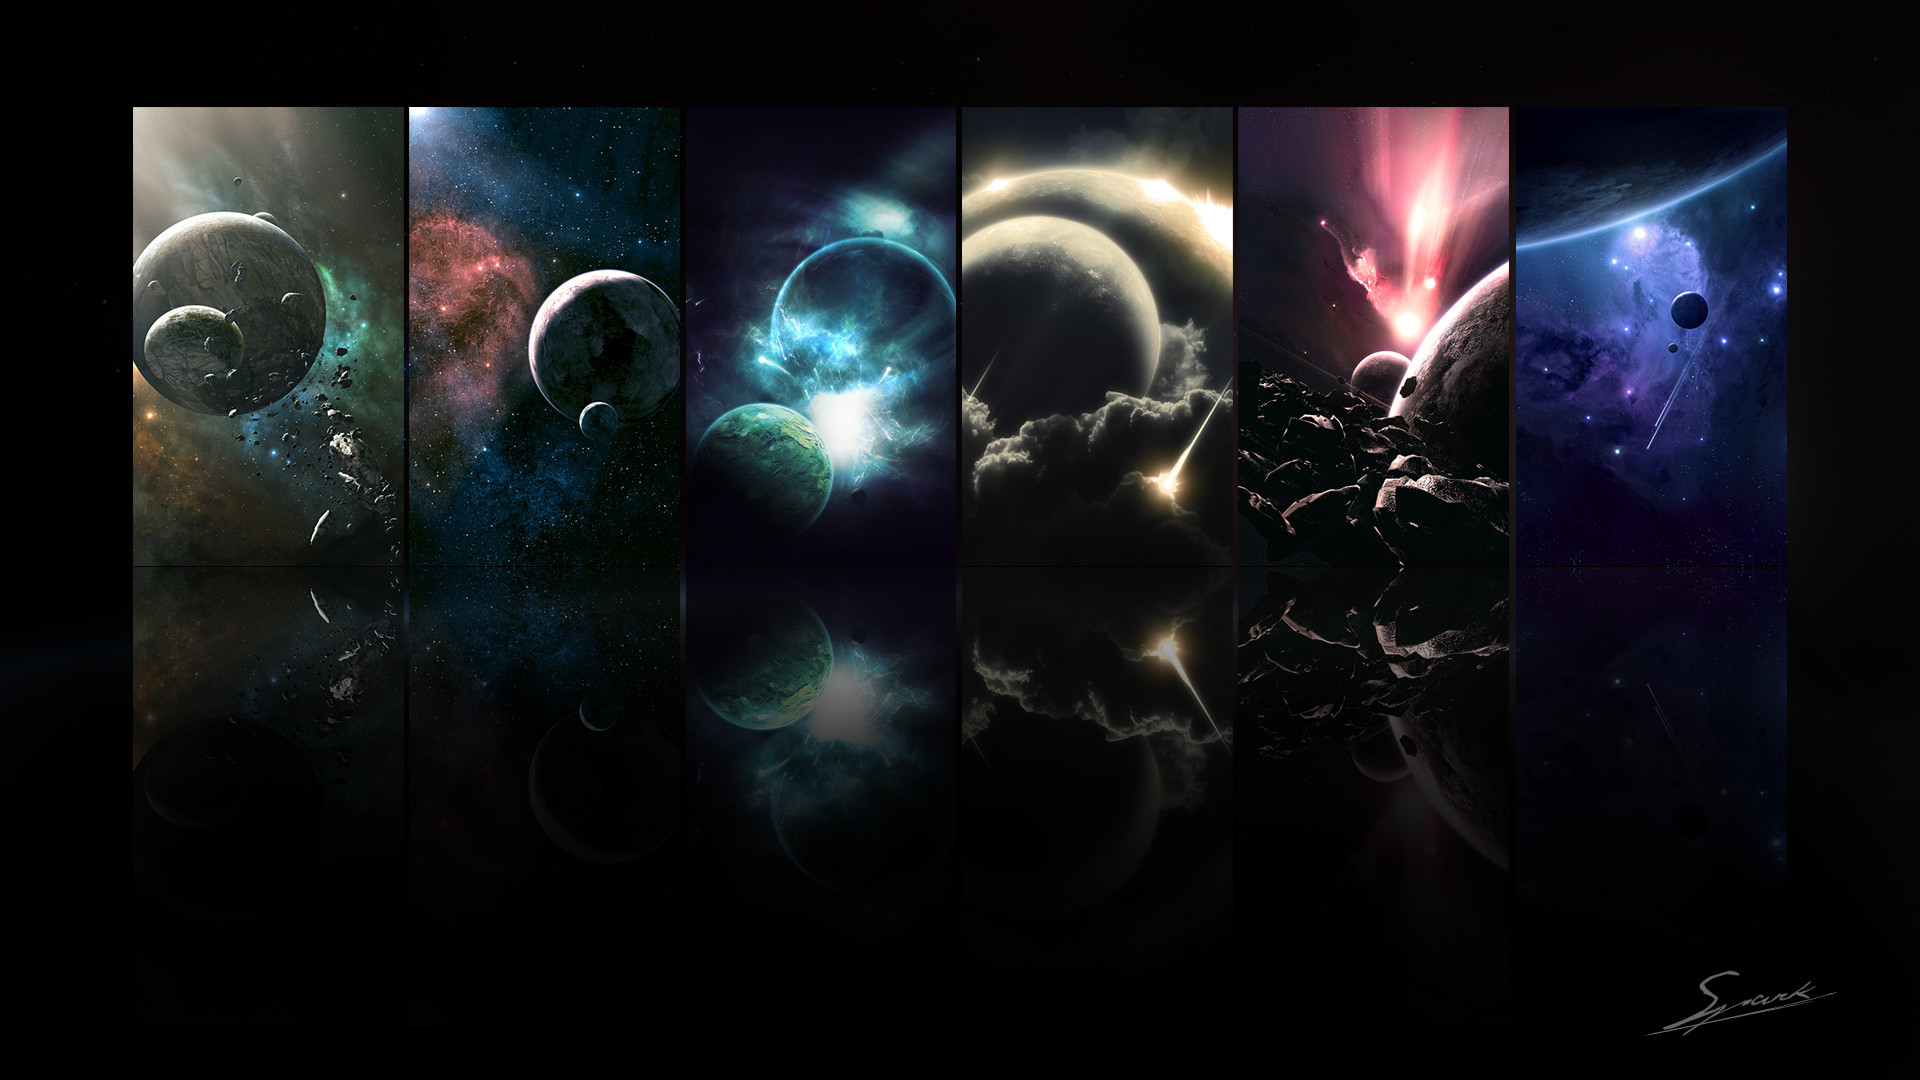 1920x1080 Space panorama wallpaper HD by Arceee Space panorama wallpaper HD by Arceee